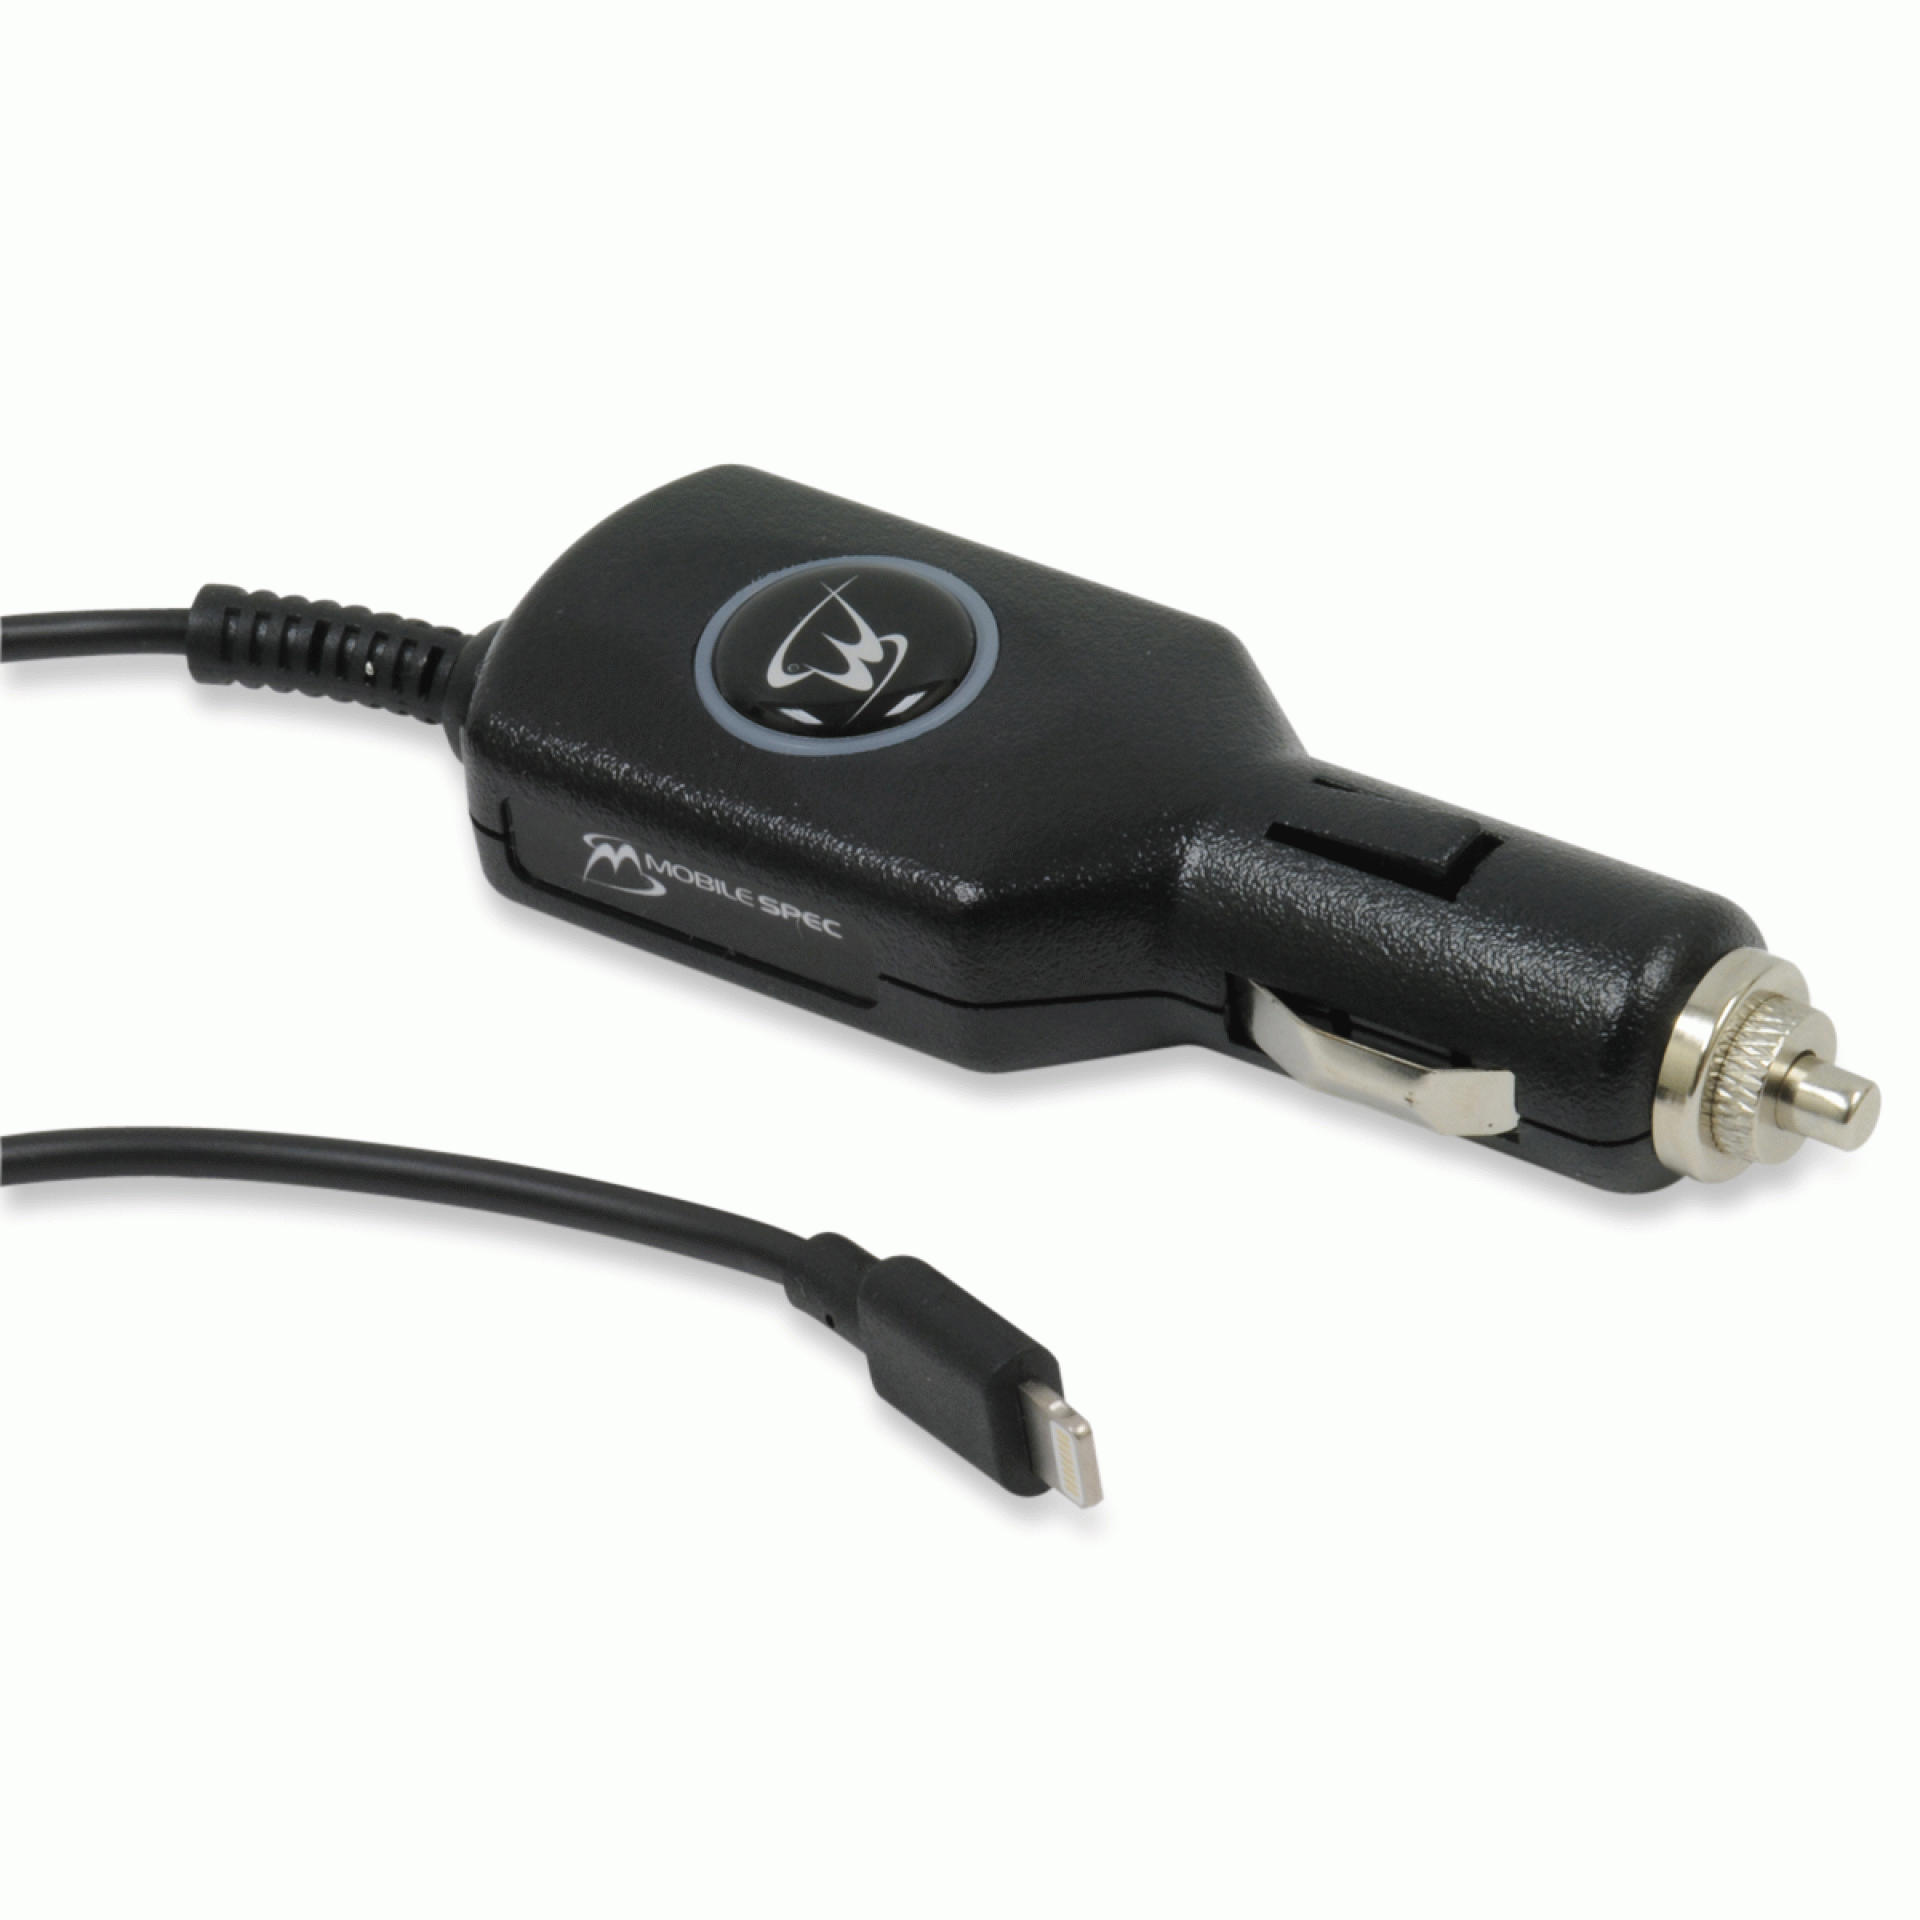 Roadpro Inc. | MSCVCIPHO5 | MobileSpec Charger For iPhone 5 iPod Touch iPod Nano